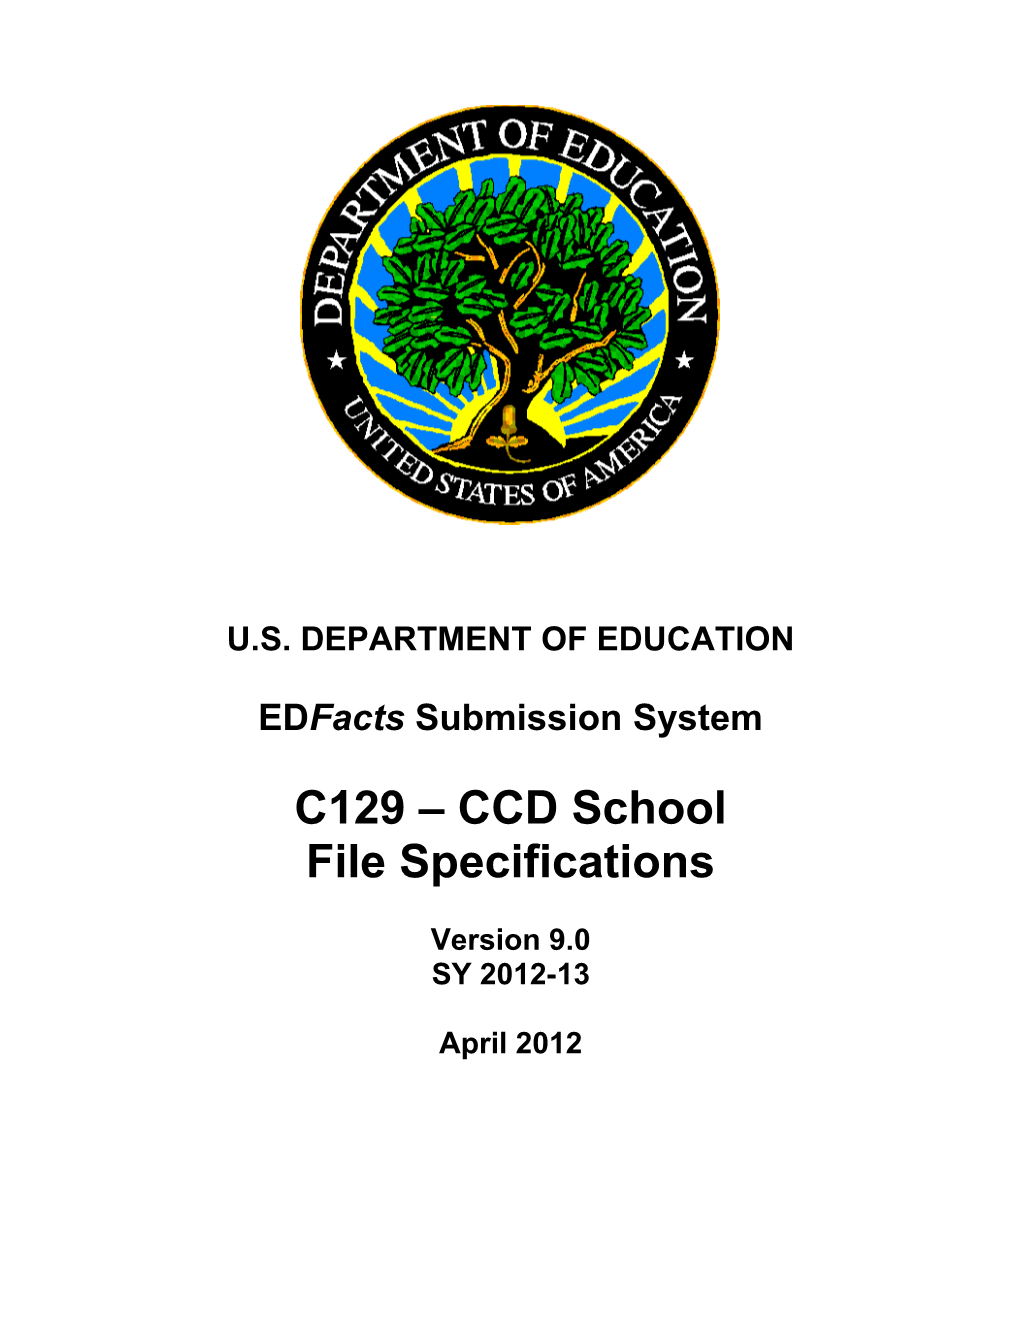 CCD School File Specifications